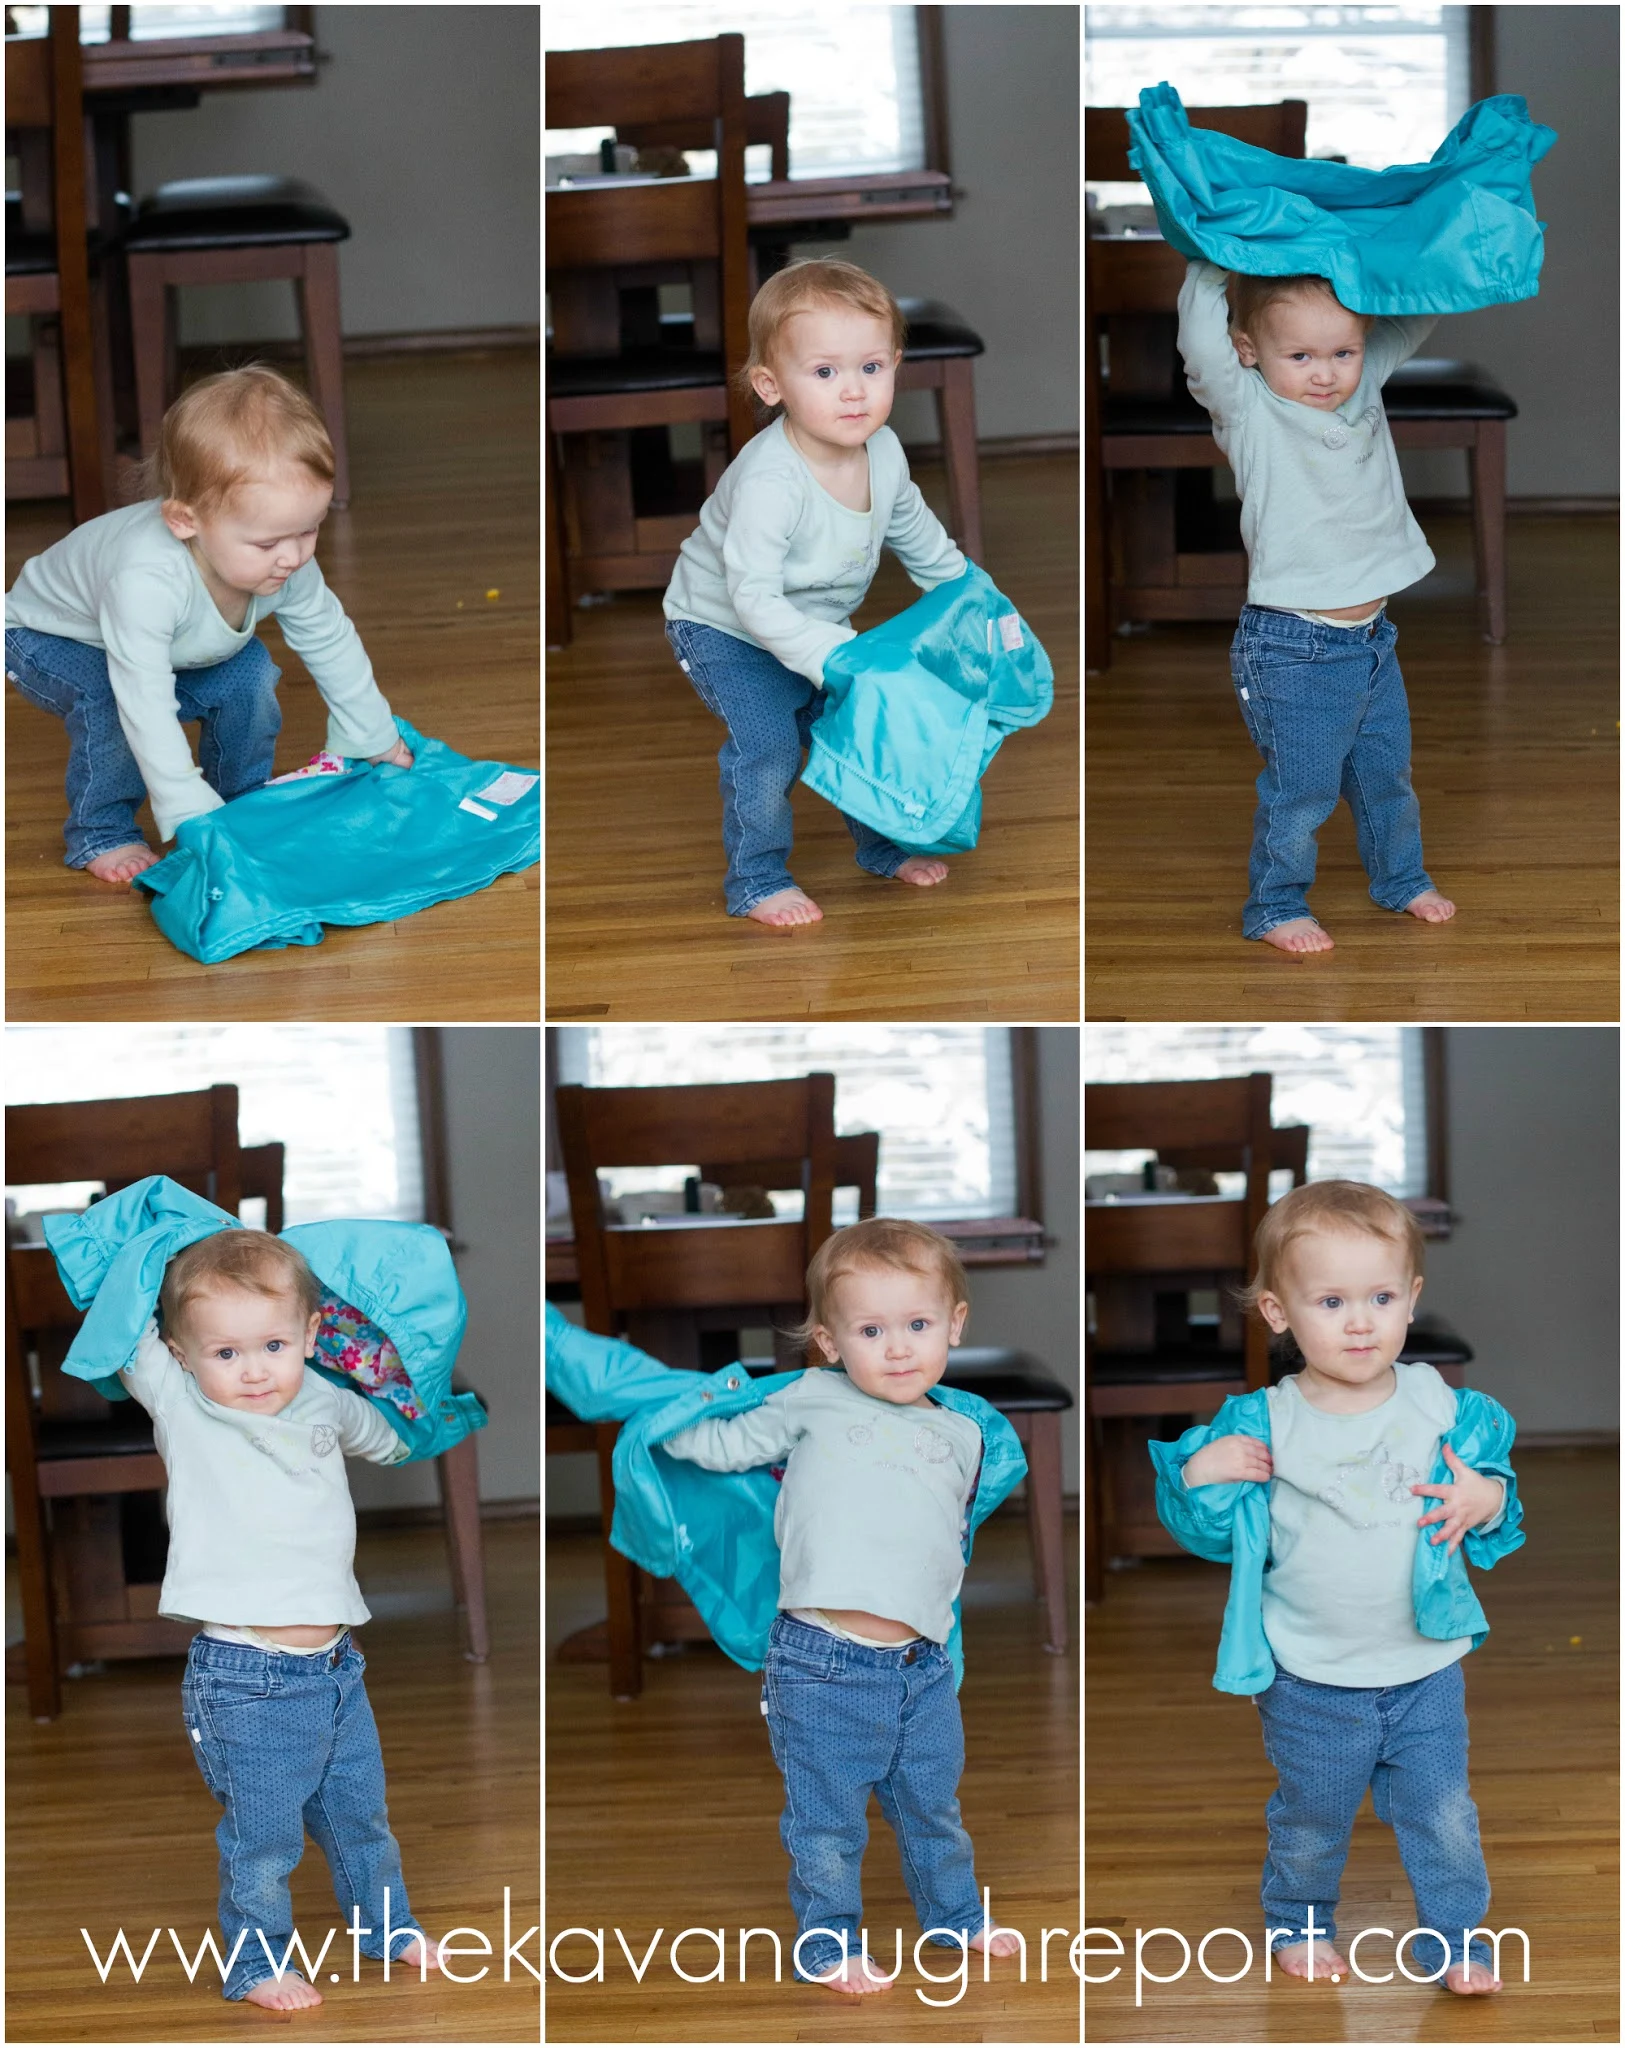 Teach toddlers how to put on their coats the Montessori way. This easy coat flip trick can be used with the youngest kids.